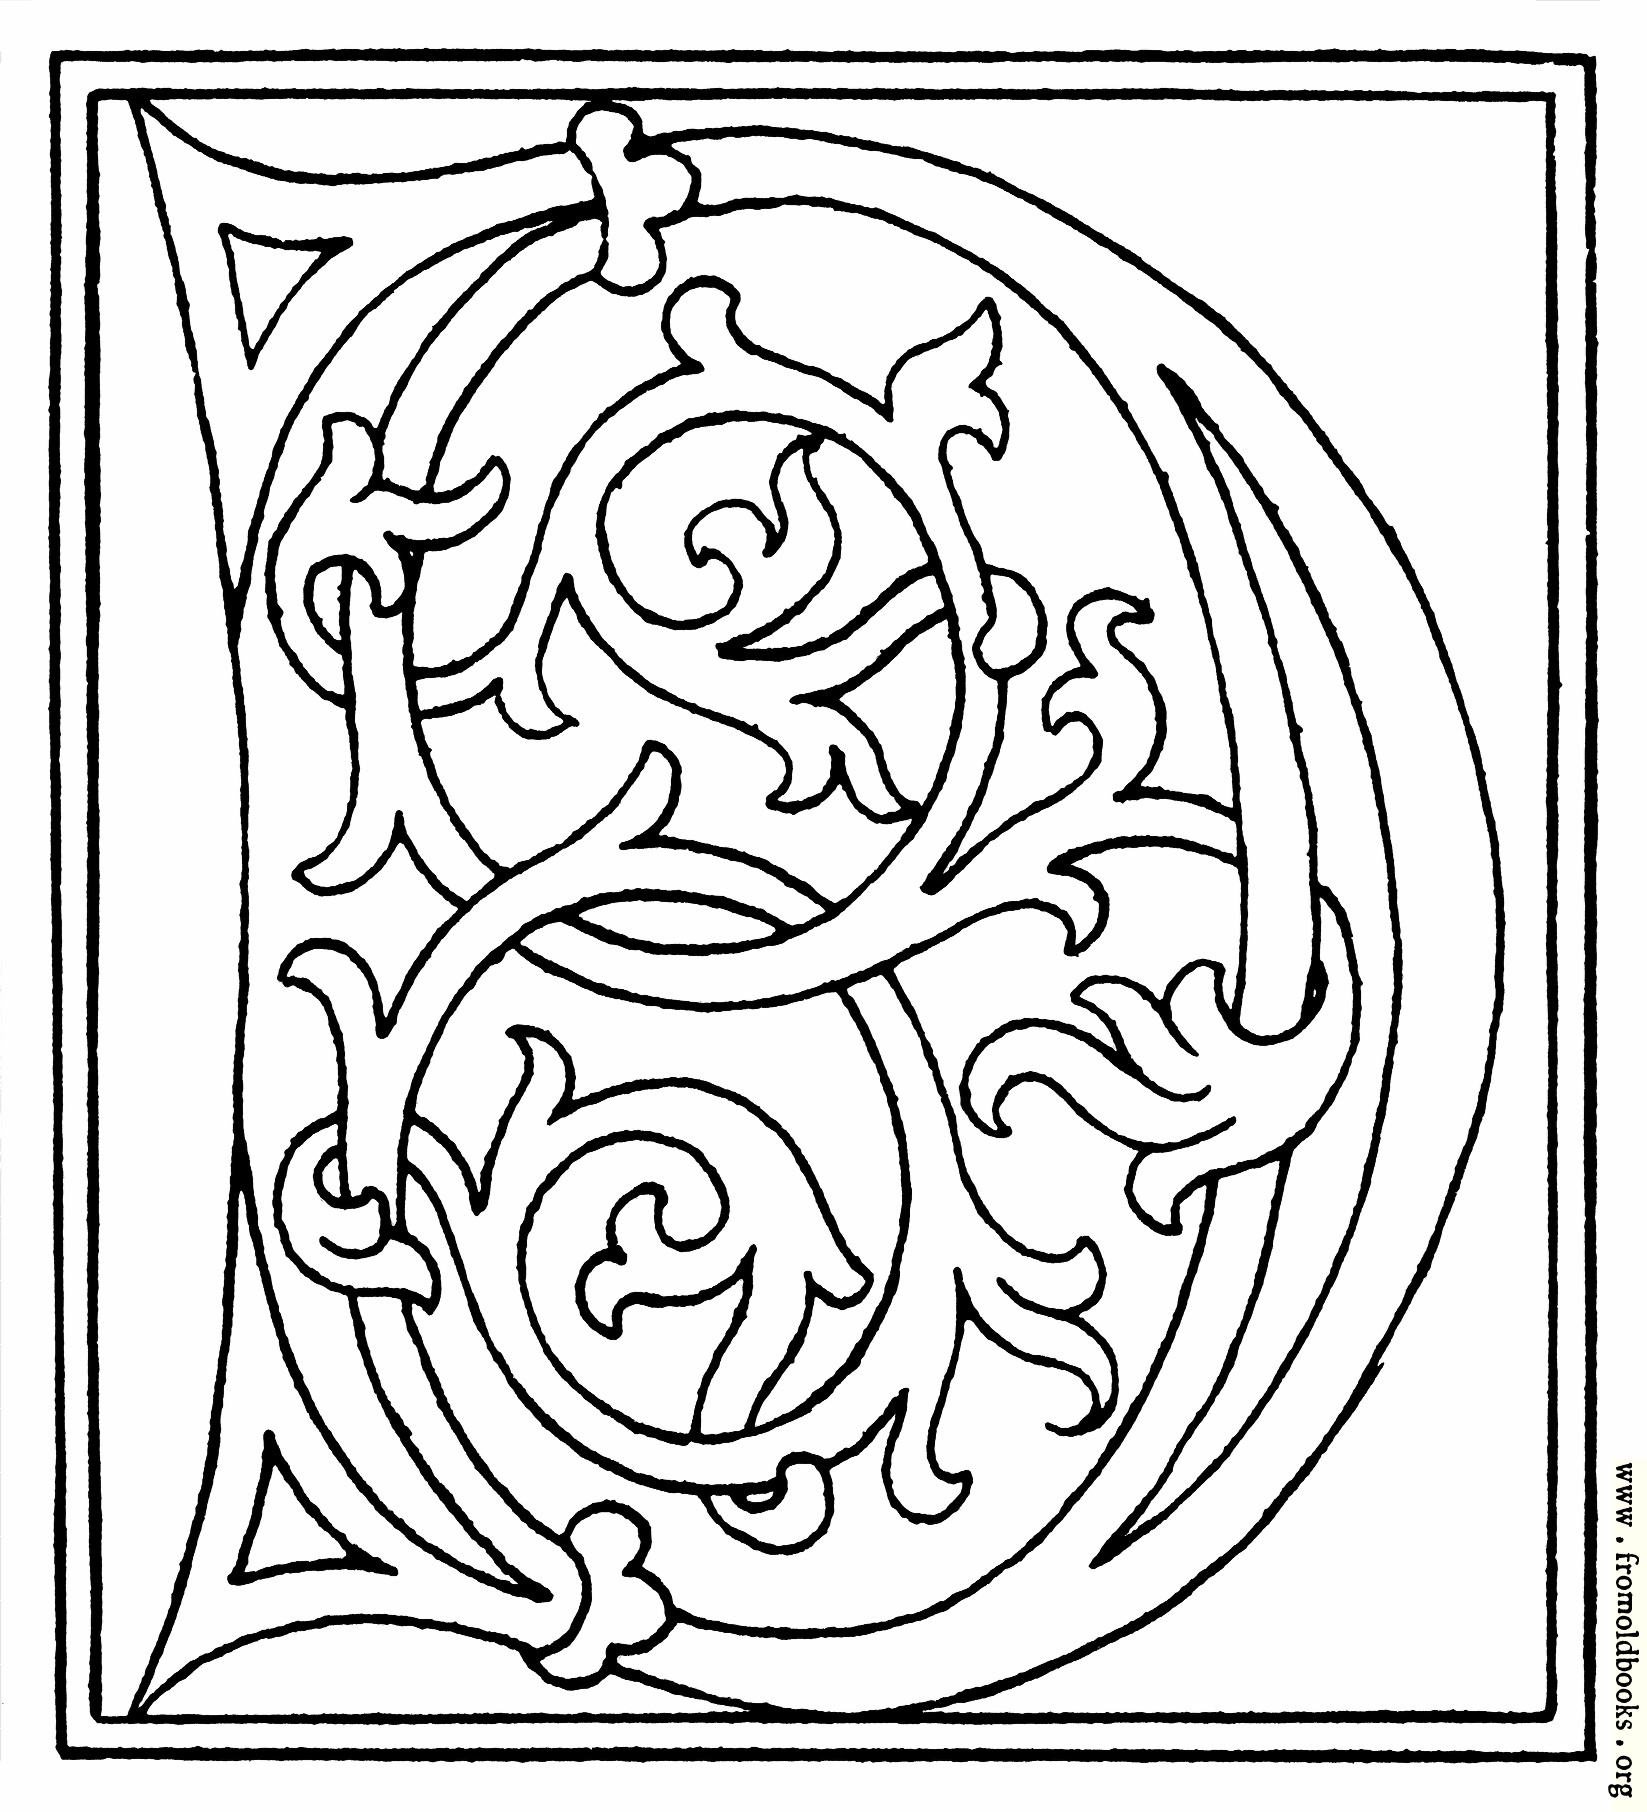 fobo-clipart-initial-letter-d-from-late-15th-century-printed-book